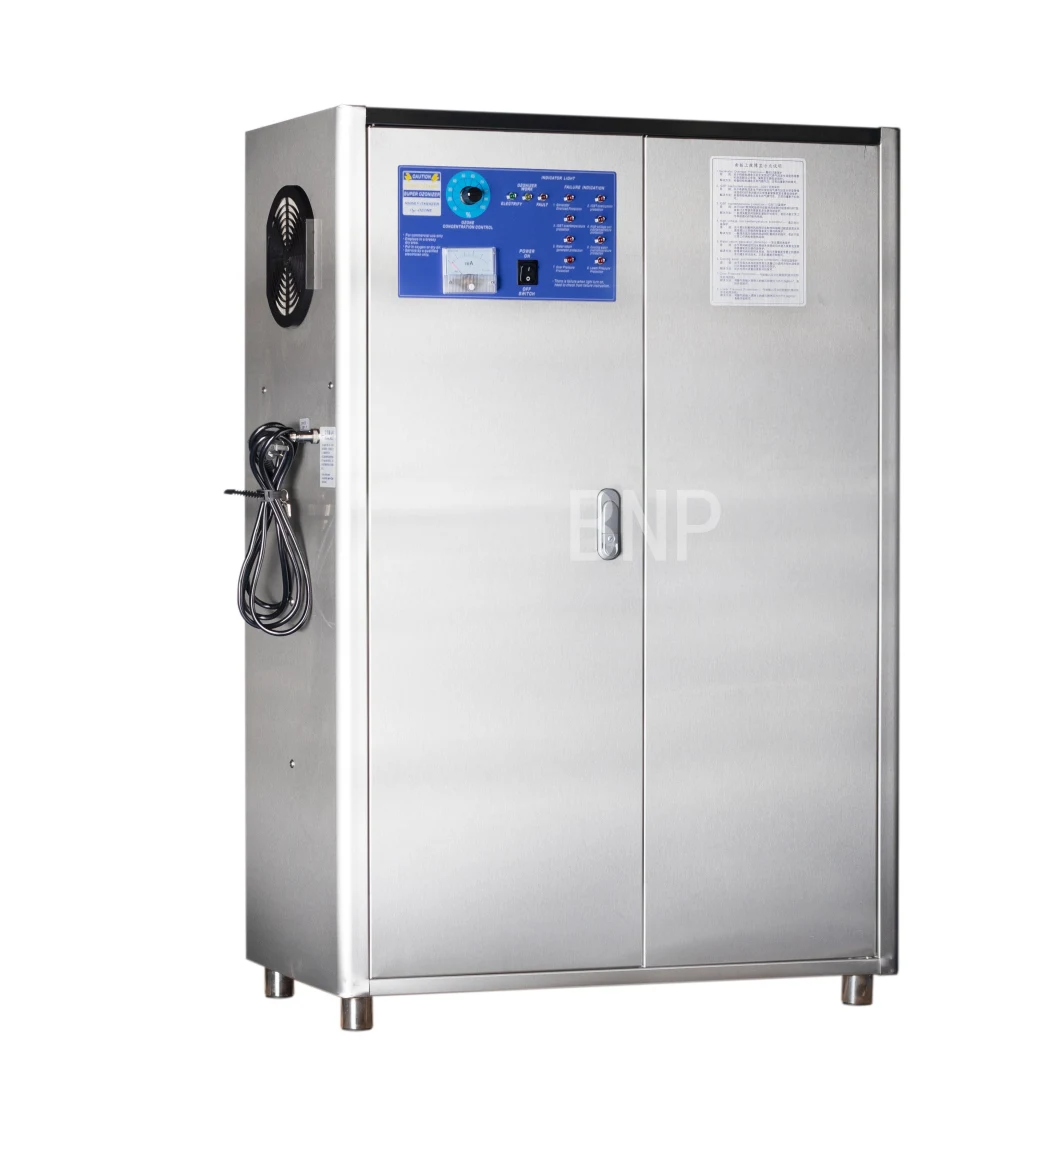 Bnp Manufacturer Yw-200g Industrial Ozone Generator for Air Pool Water Treatment